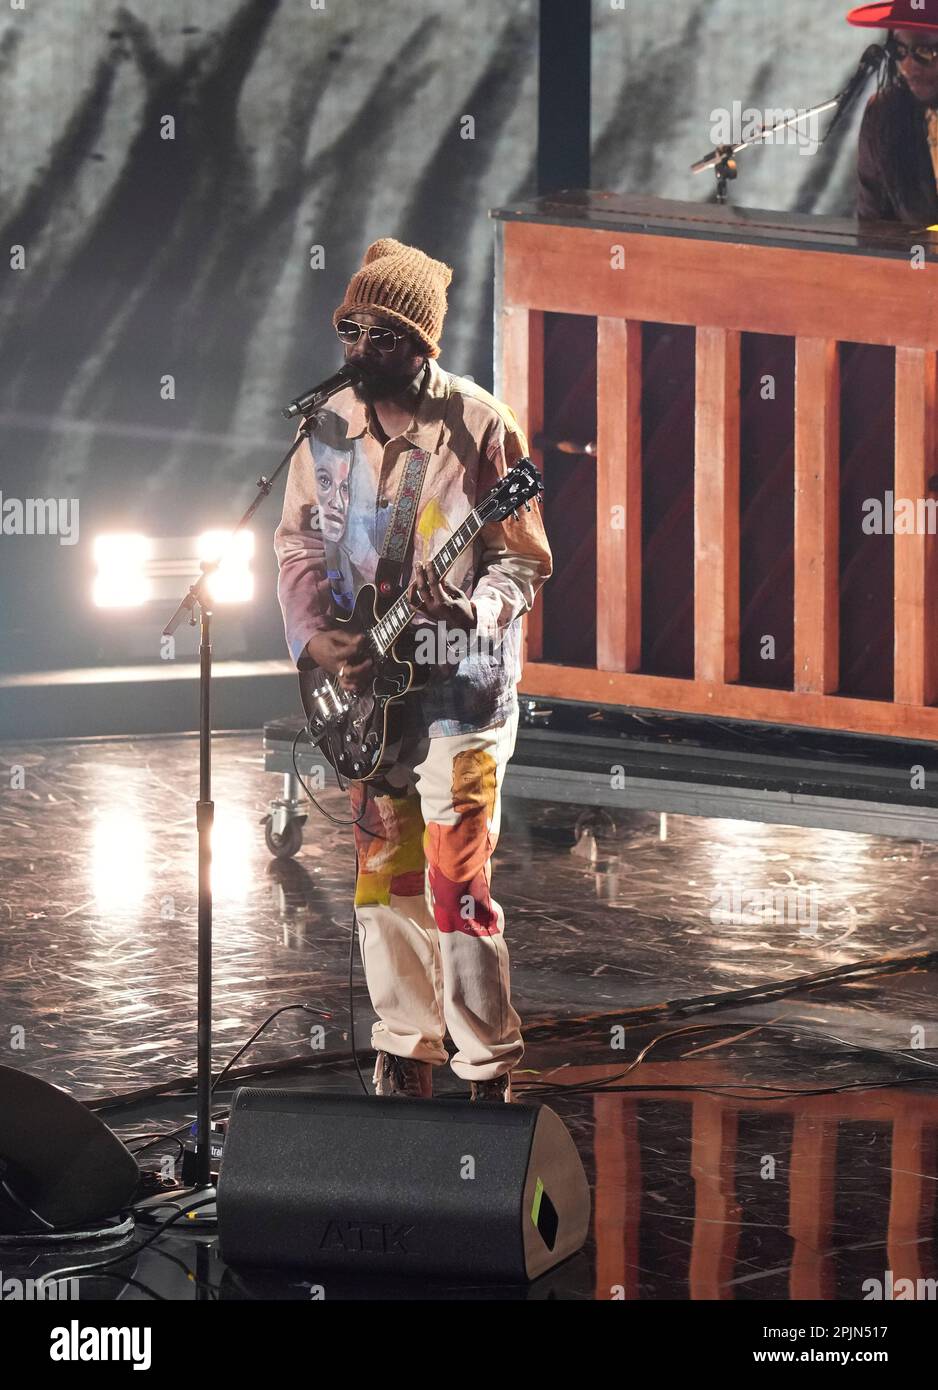 Austin guitarist and singer GARY CLARK JR. performs a tribute to another Austin guitarist, Stevie Ray Vaughn, onstage at the 2023 Country Music Television (CMT) Music Awards held for the first time in Austin, Texas on April 2, 2023 at the Moody Center before a sold out crowd. Credit: Bob Daemmrich/Alamy Live News Stock Photo